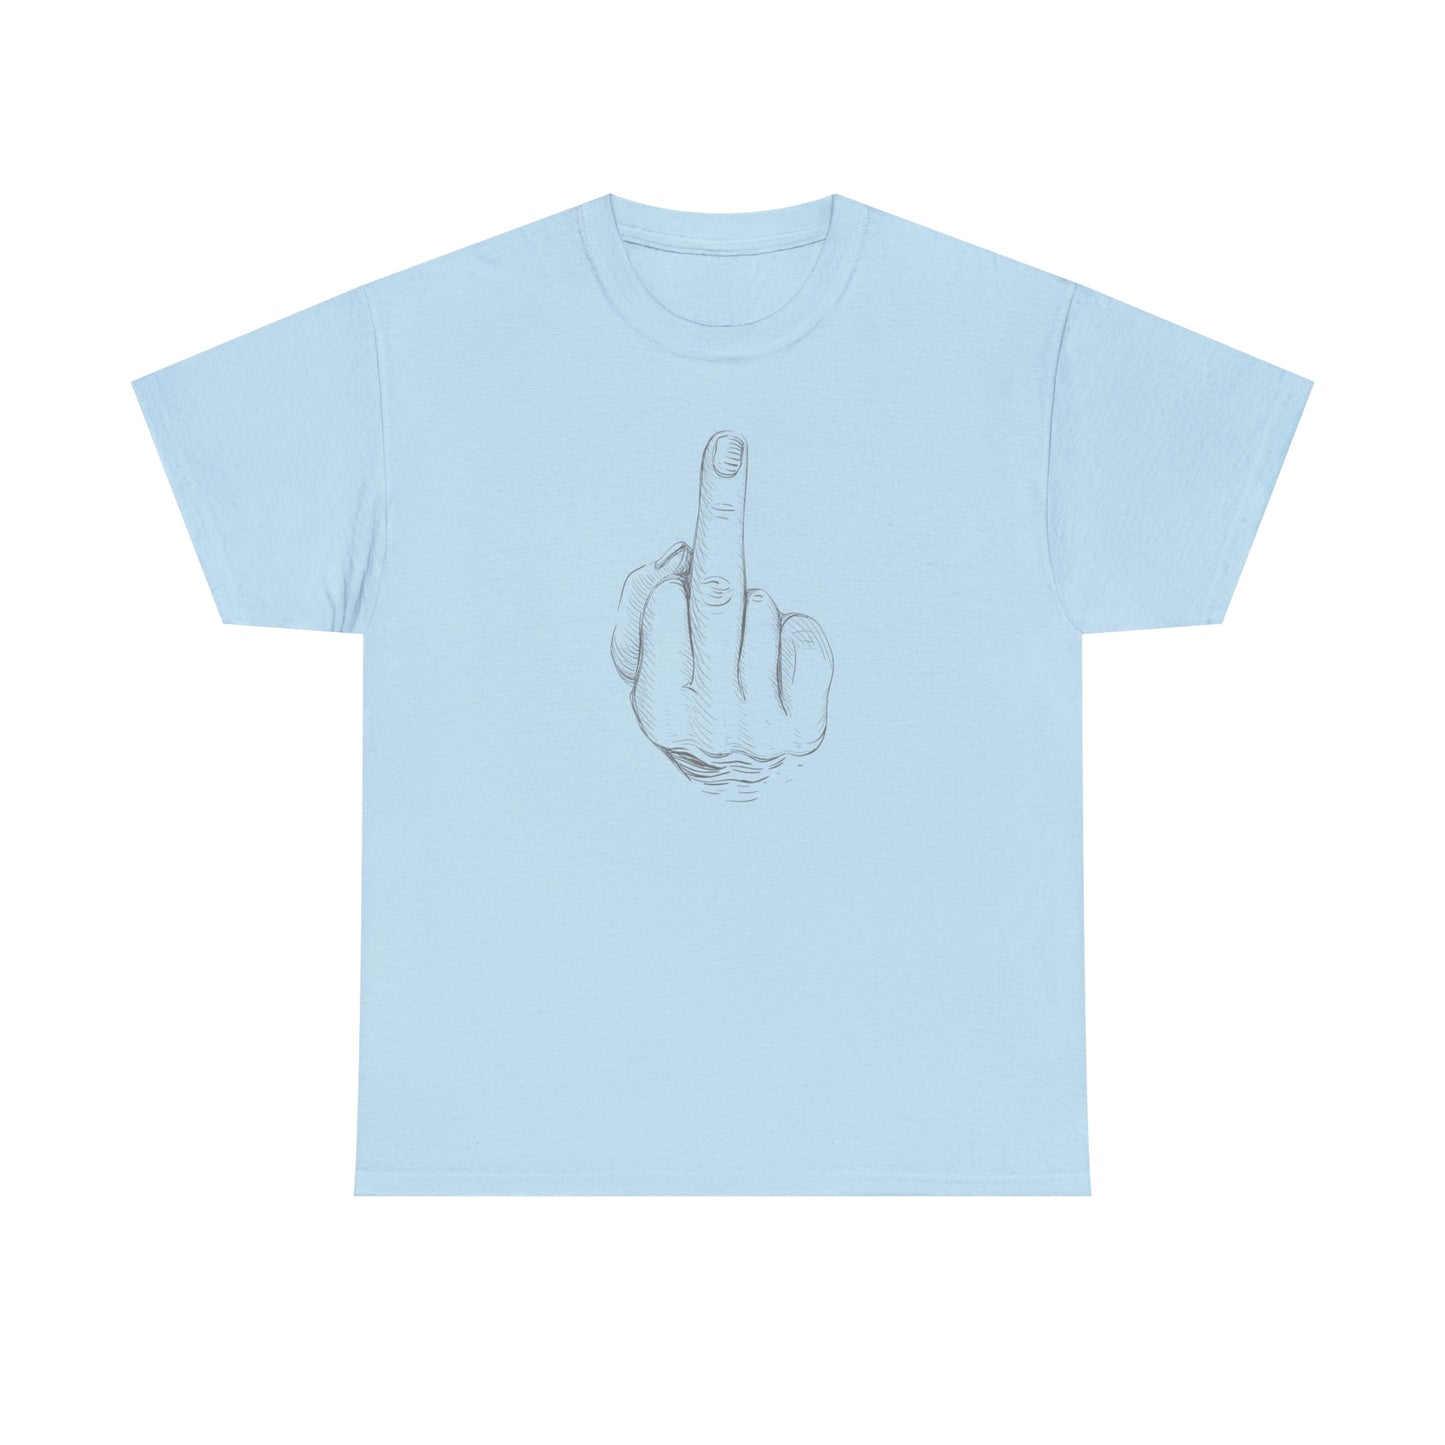 Middle Finger T-Shirt Fuck You TShirt For Sarcastic Attitude T Shirt For Conservative Shirt For MAGA T-Shirt For Conservative TShirt